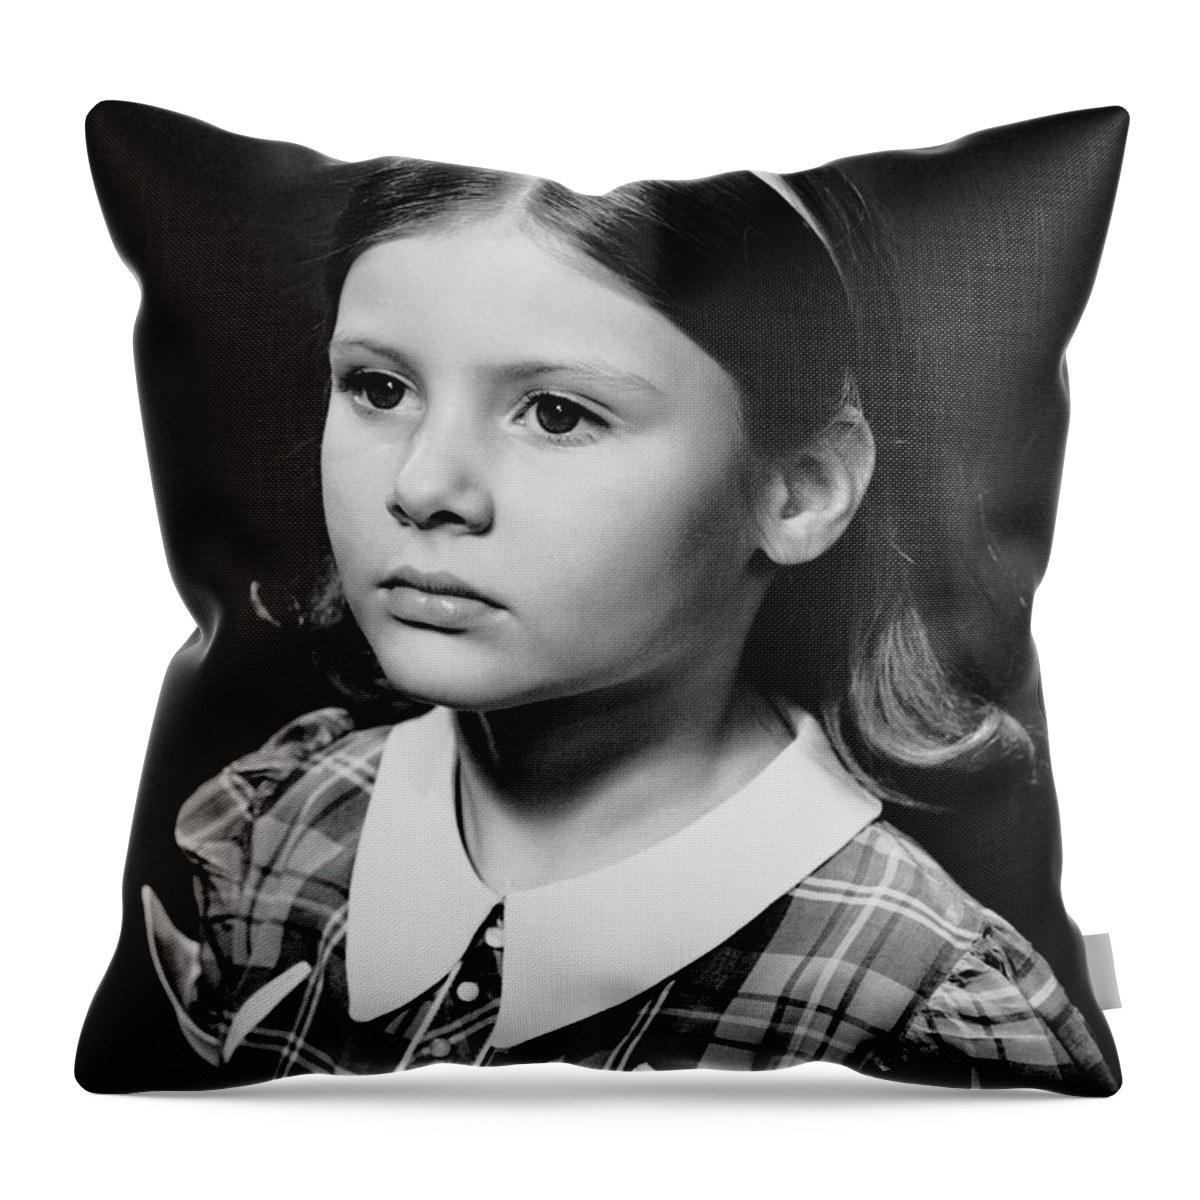 Child Throw Pillow featuring the photograph Portrait Of Sad Young Girl by George Marks